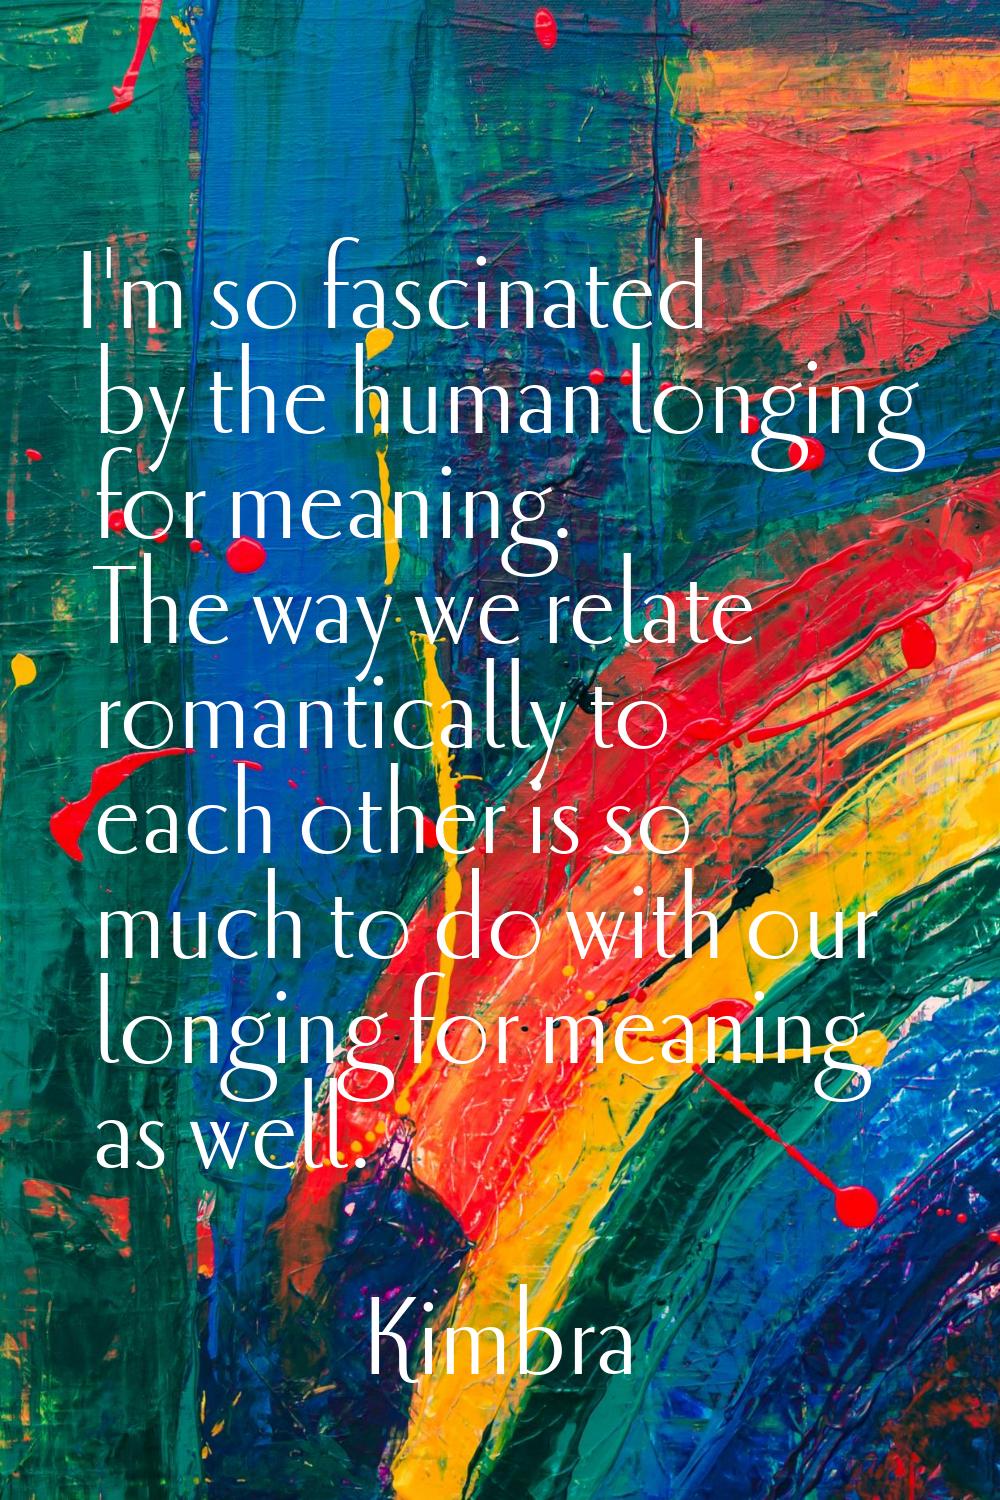 I'm so fascinated by the human longing for meaning. The way we relate romantically to each other is